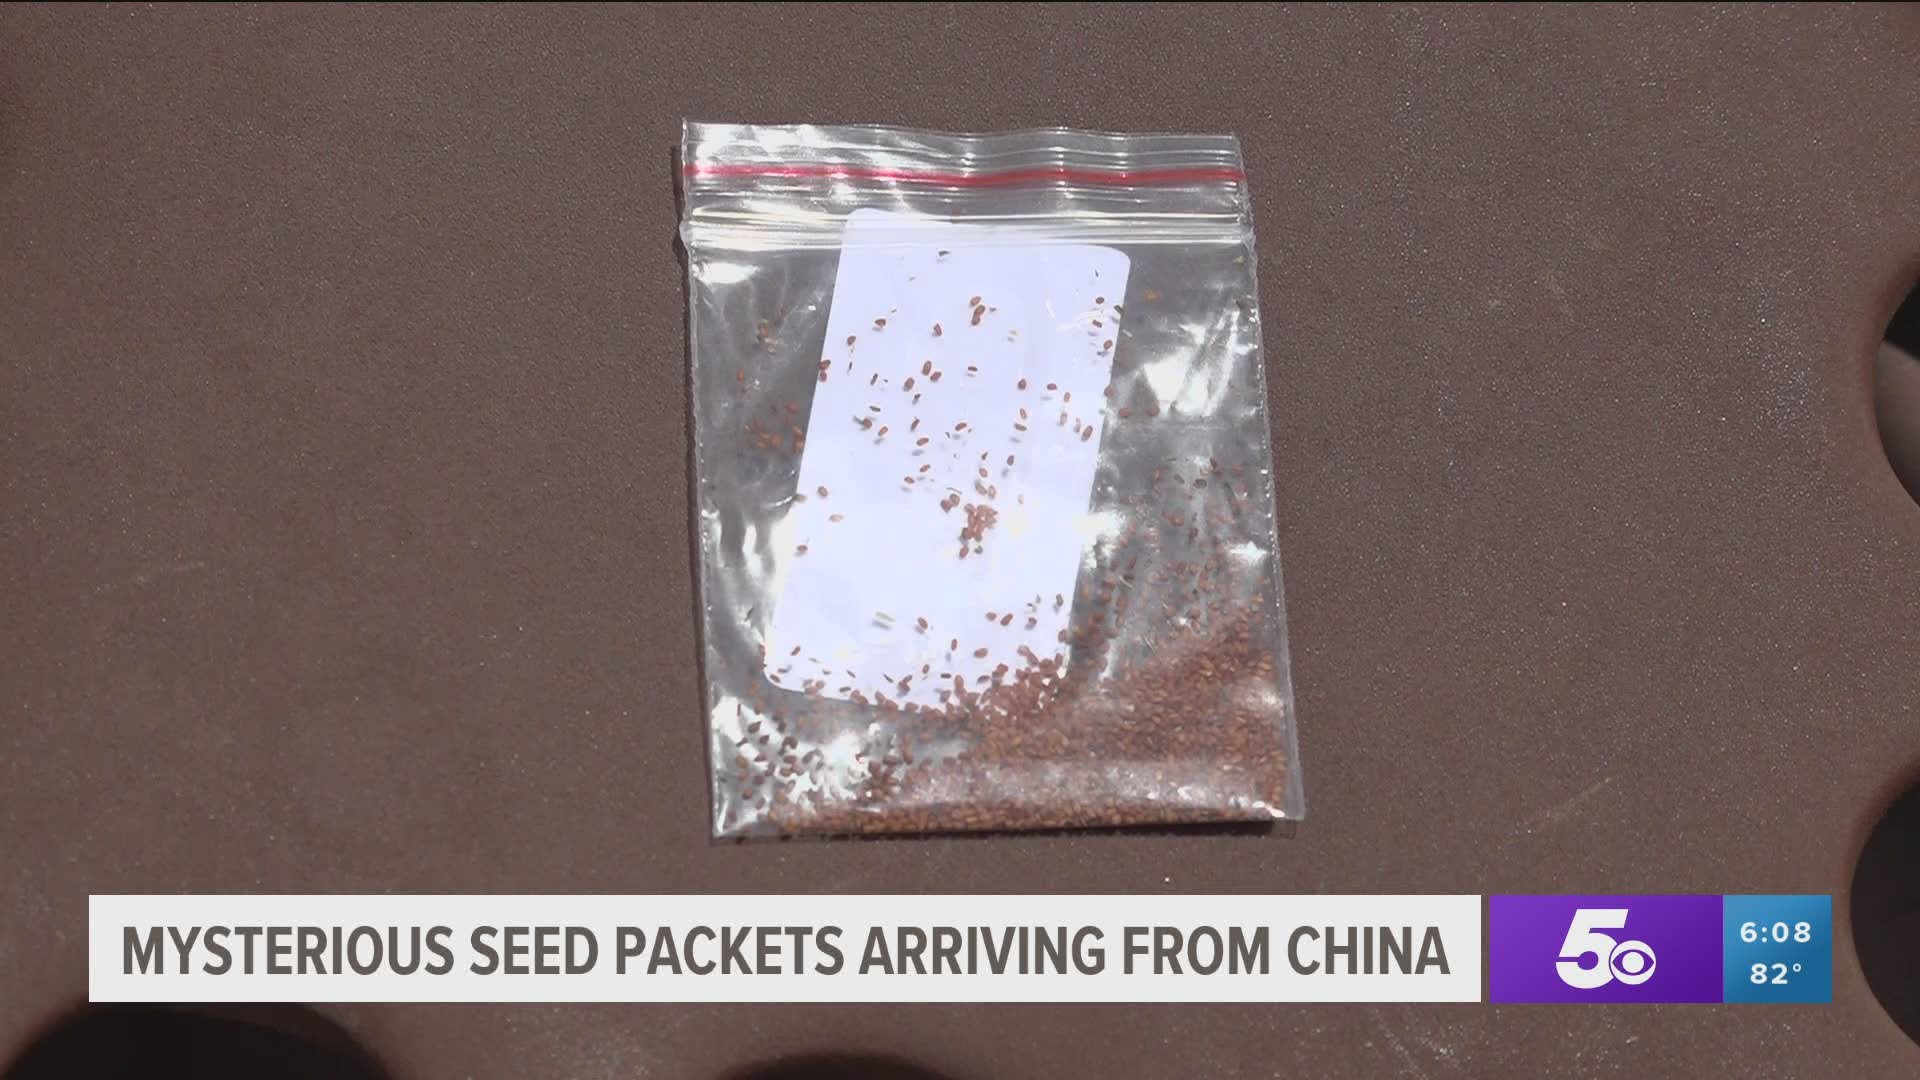 The Dept. of Agriculture asks the public to be on the lookout for the seeds originating from China. https://bit.ly/3jOpEFZ